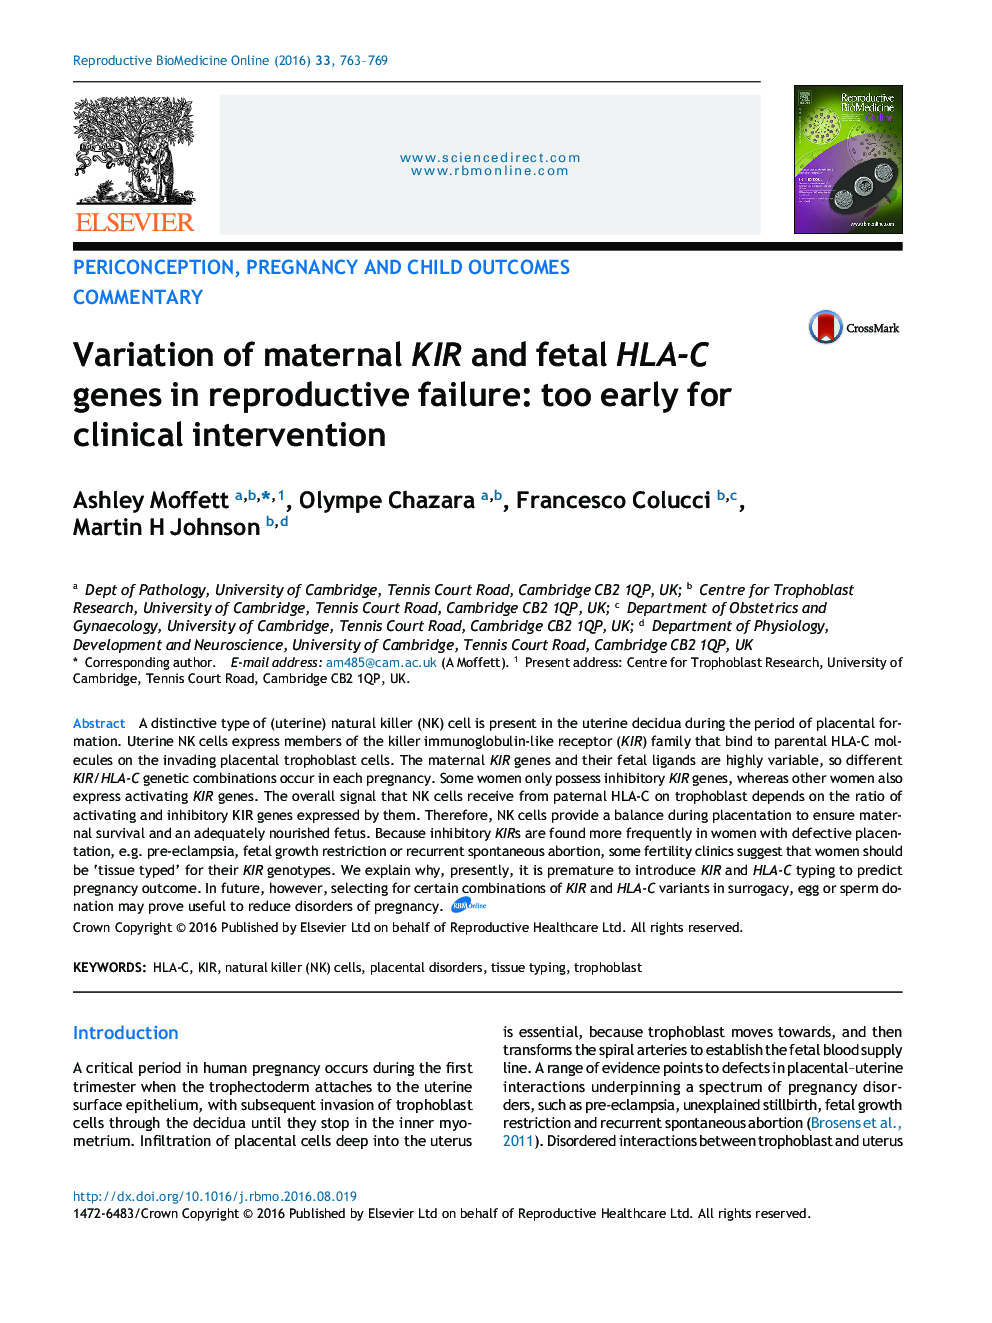 Variation of maternal KIR and fetal HLA-C genes in reproductive failure: too early for clinical intervention